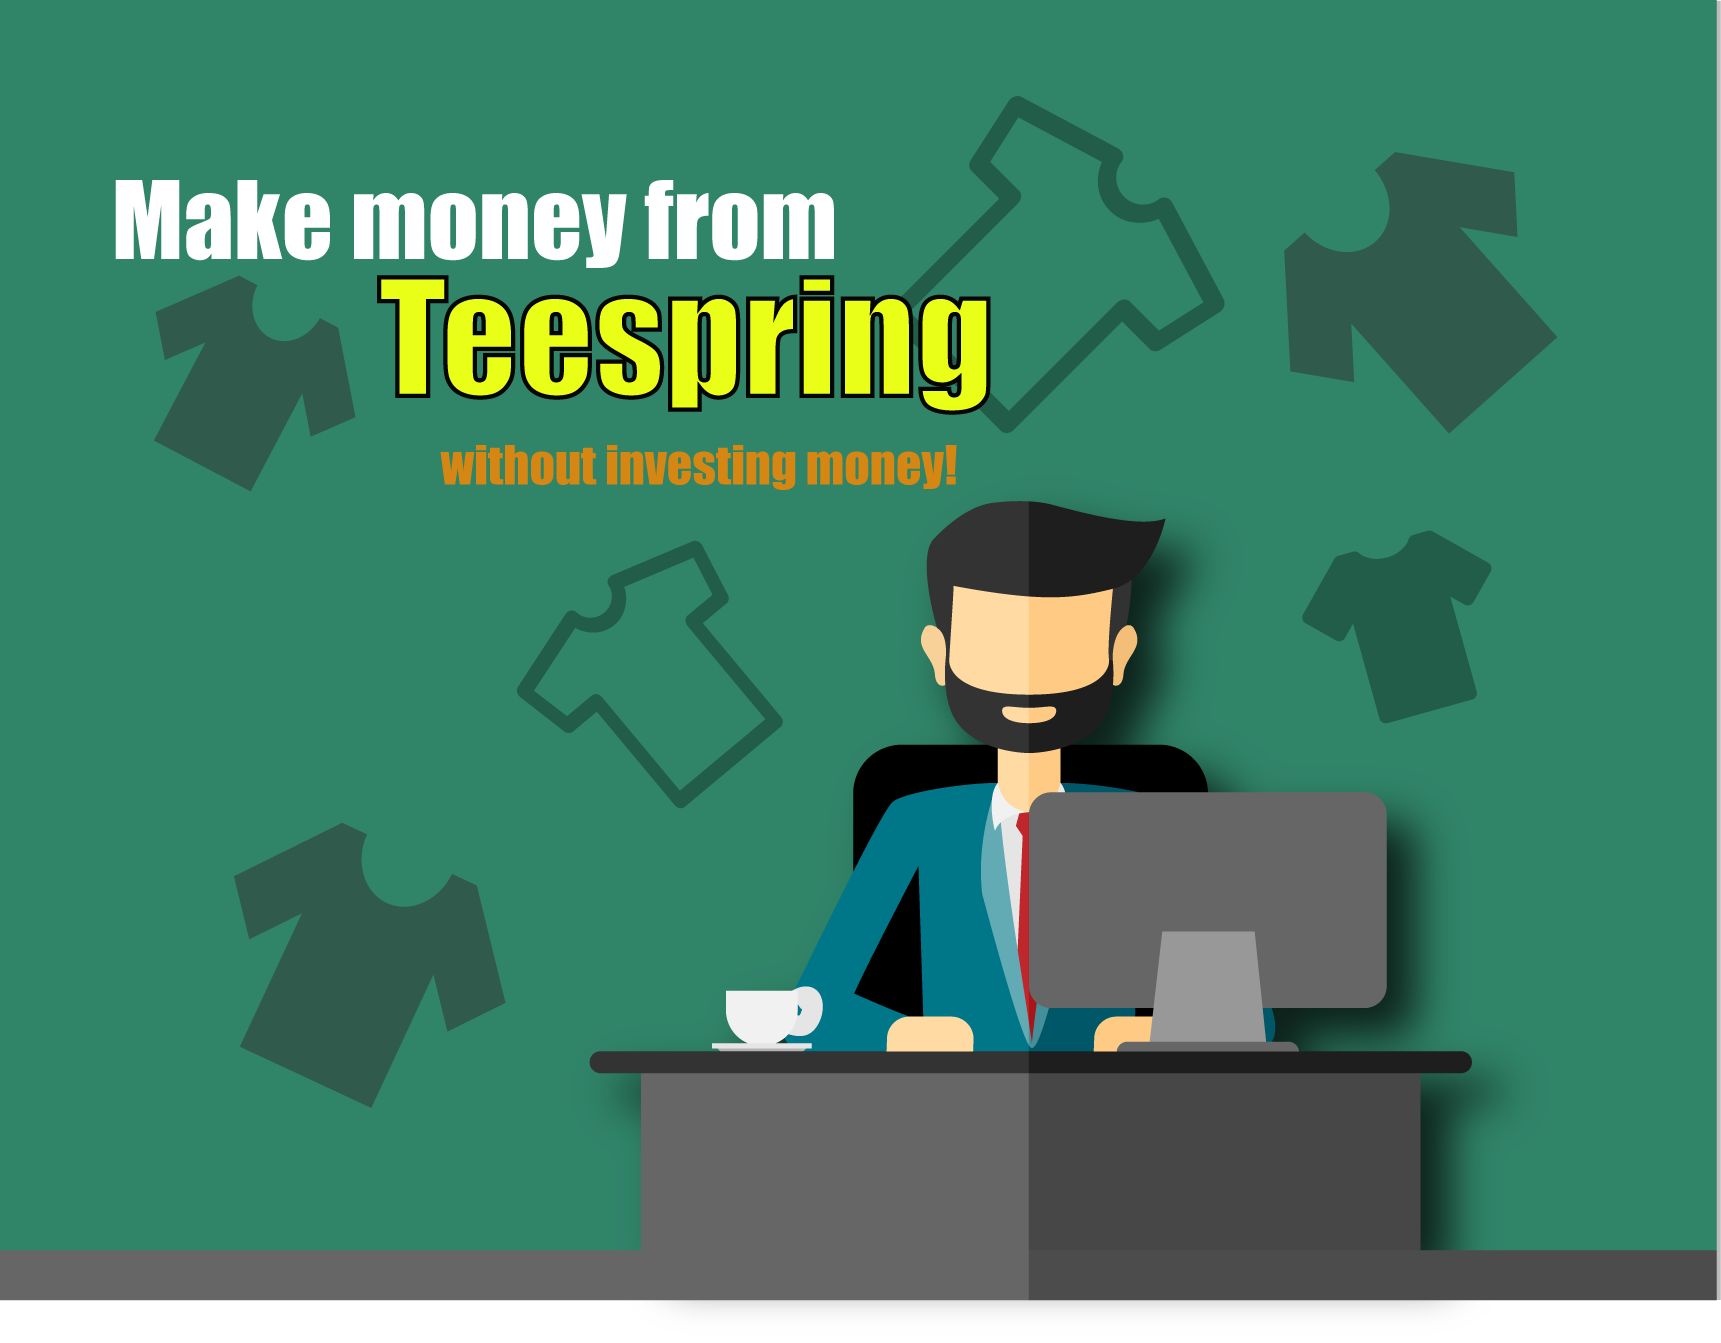 How to make money from Teespring without investing money!